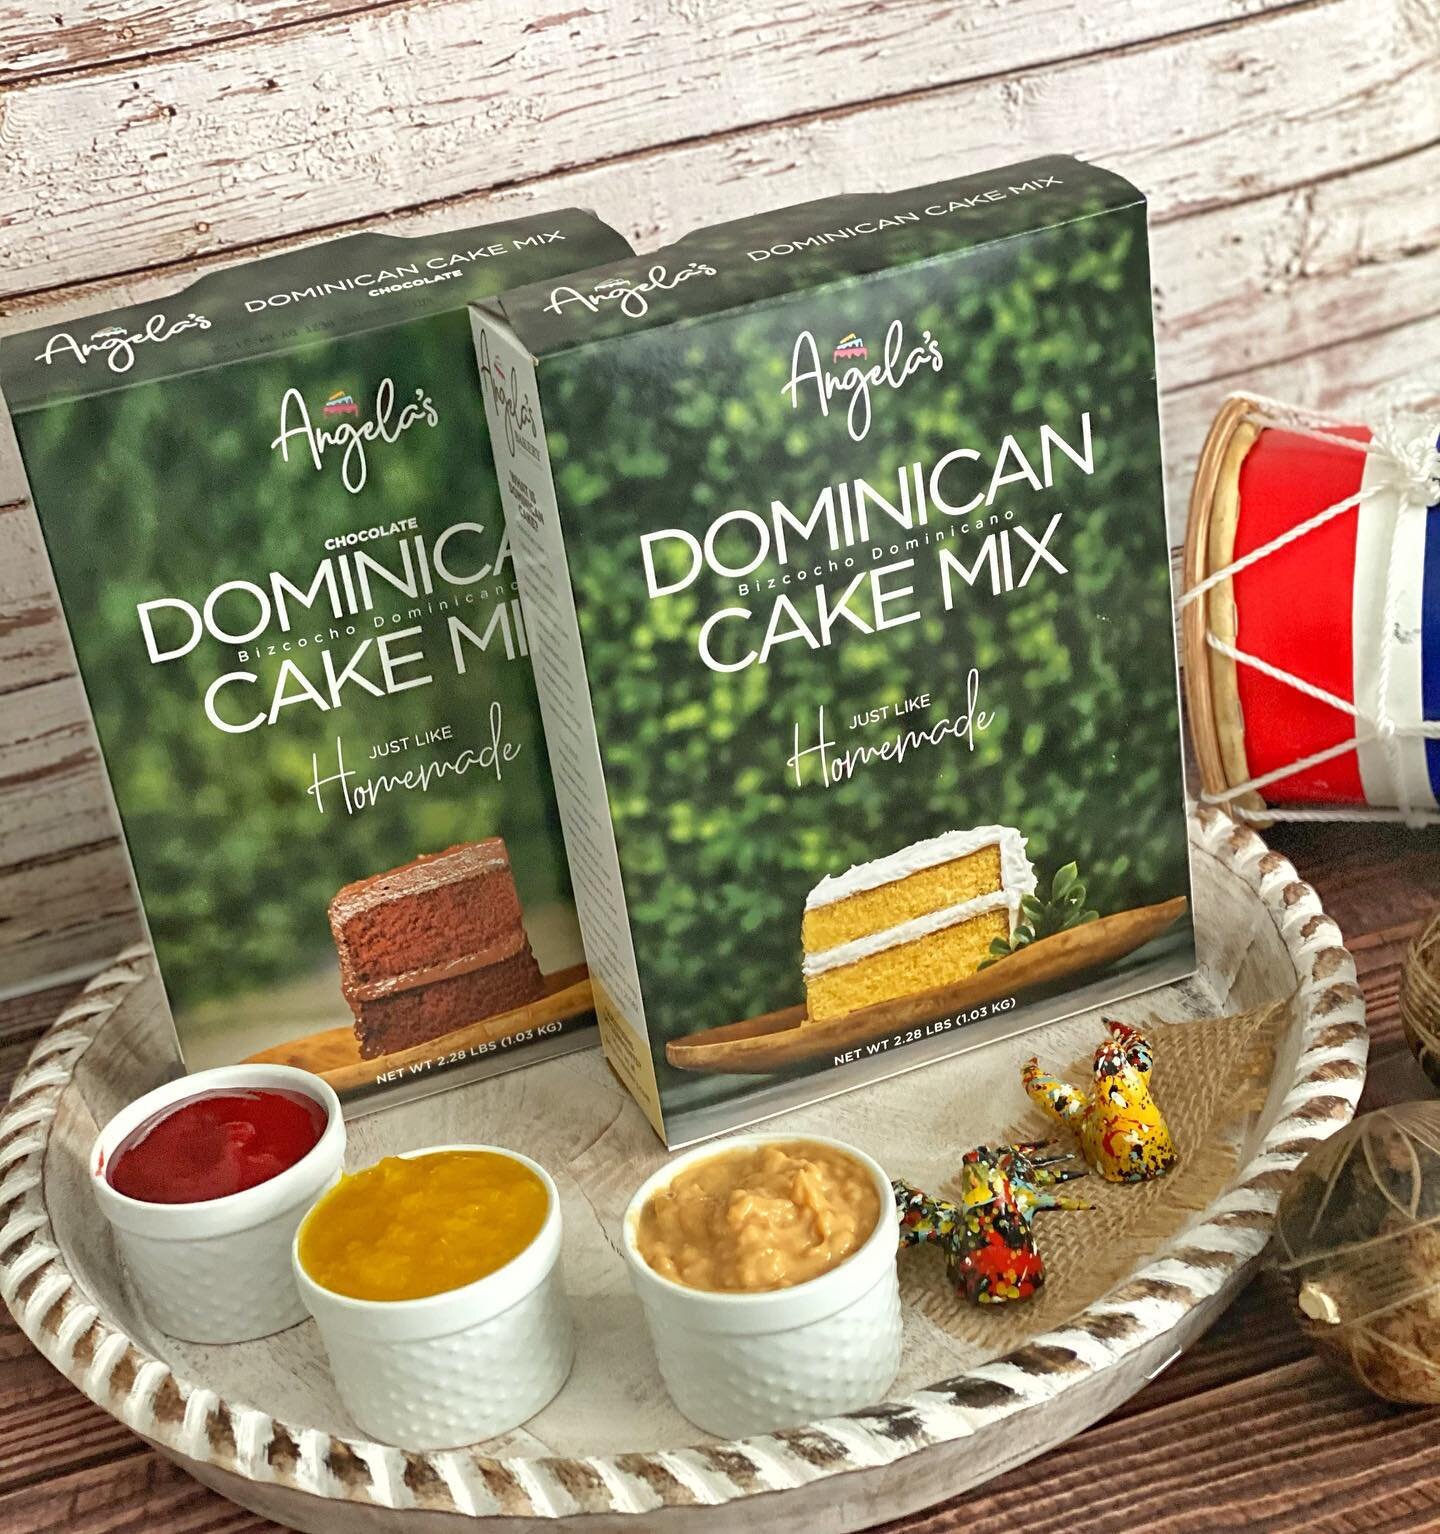 Did you know that ONE BOX of Angela&rsquo;s Dominican Cake Mix equal 3 BOXES of the other average cake mixes? That means 3 times more fiestas for you. Try Angela&rsquo;s Dominican Cake Mix  @angelasbakery_cakemix  Click on link below to order.
🇩🇴
?